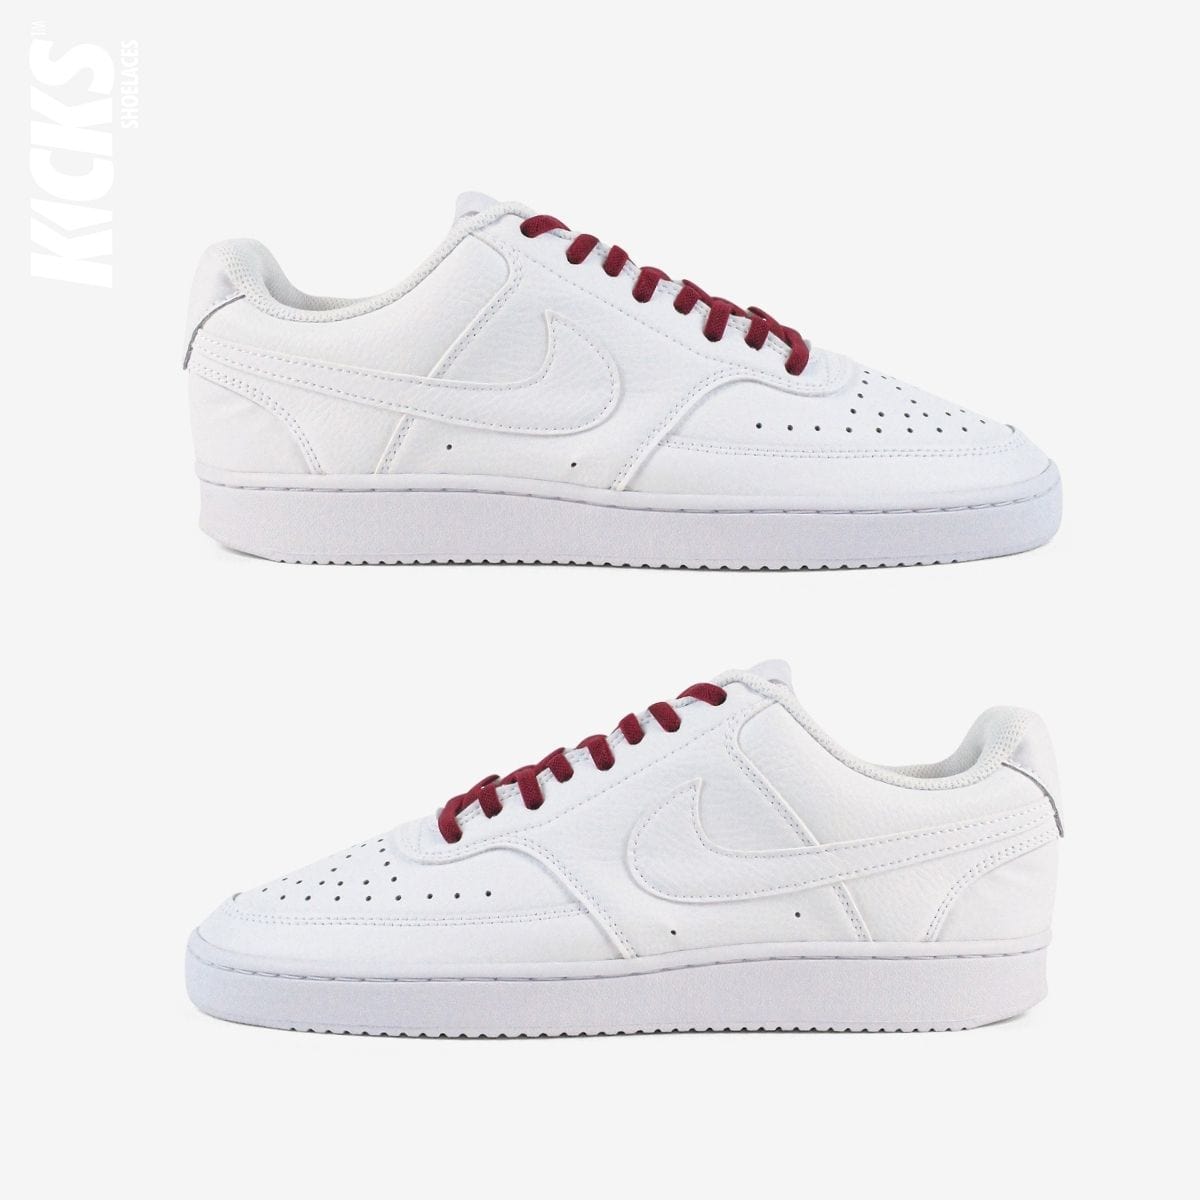 tieless-laces-with-dark-red-laces-on-nike-white-sneakers-by-kicks-shoelaces